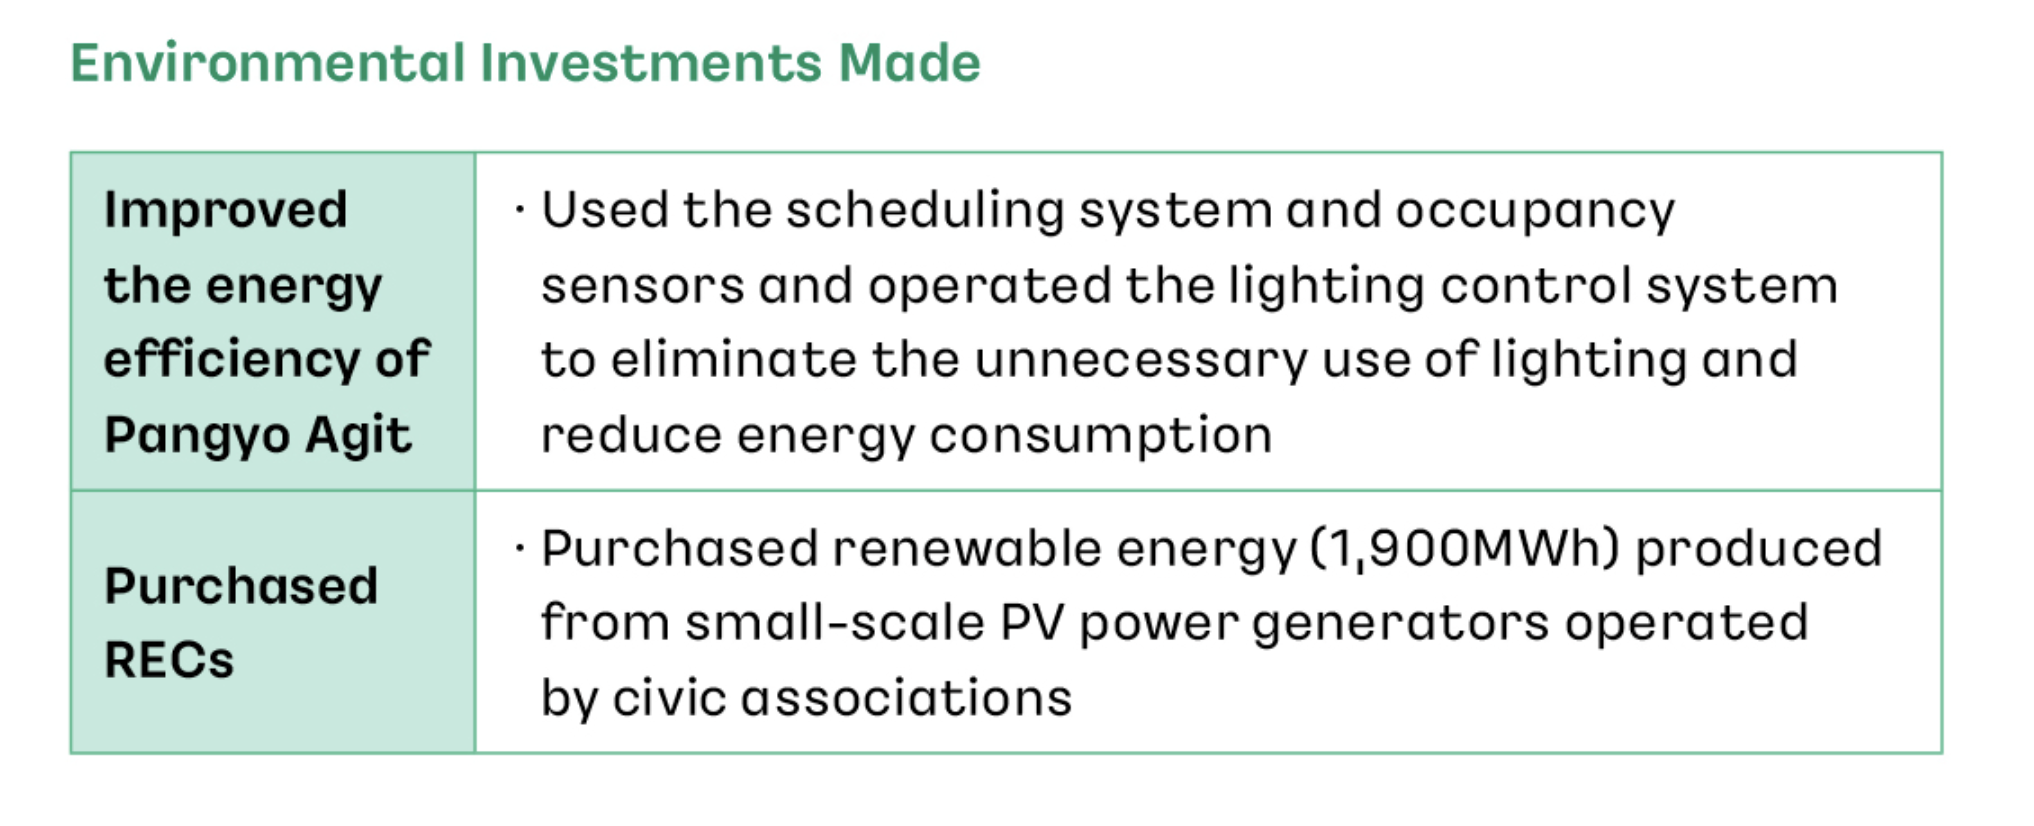 a table explaining about ‘improved energy efficiency of Pangyo Agit’ and ‘Purchased RECs’ regarding Environmental Investments Made